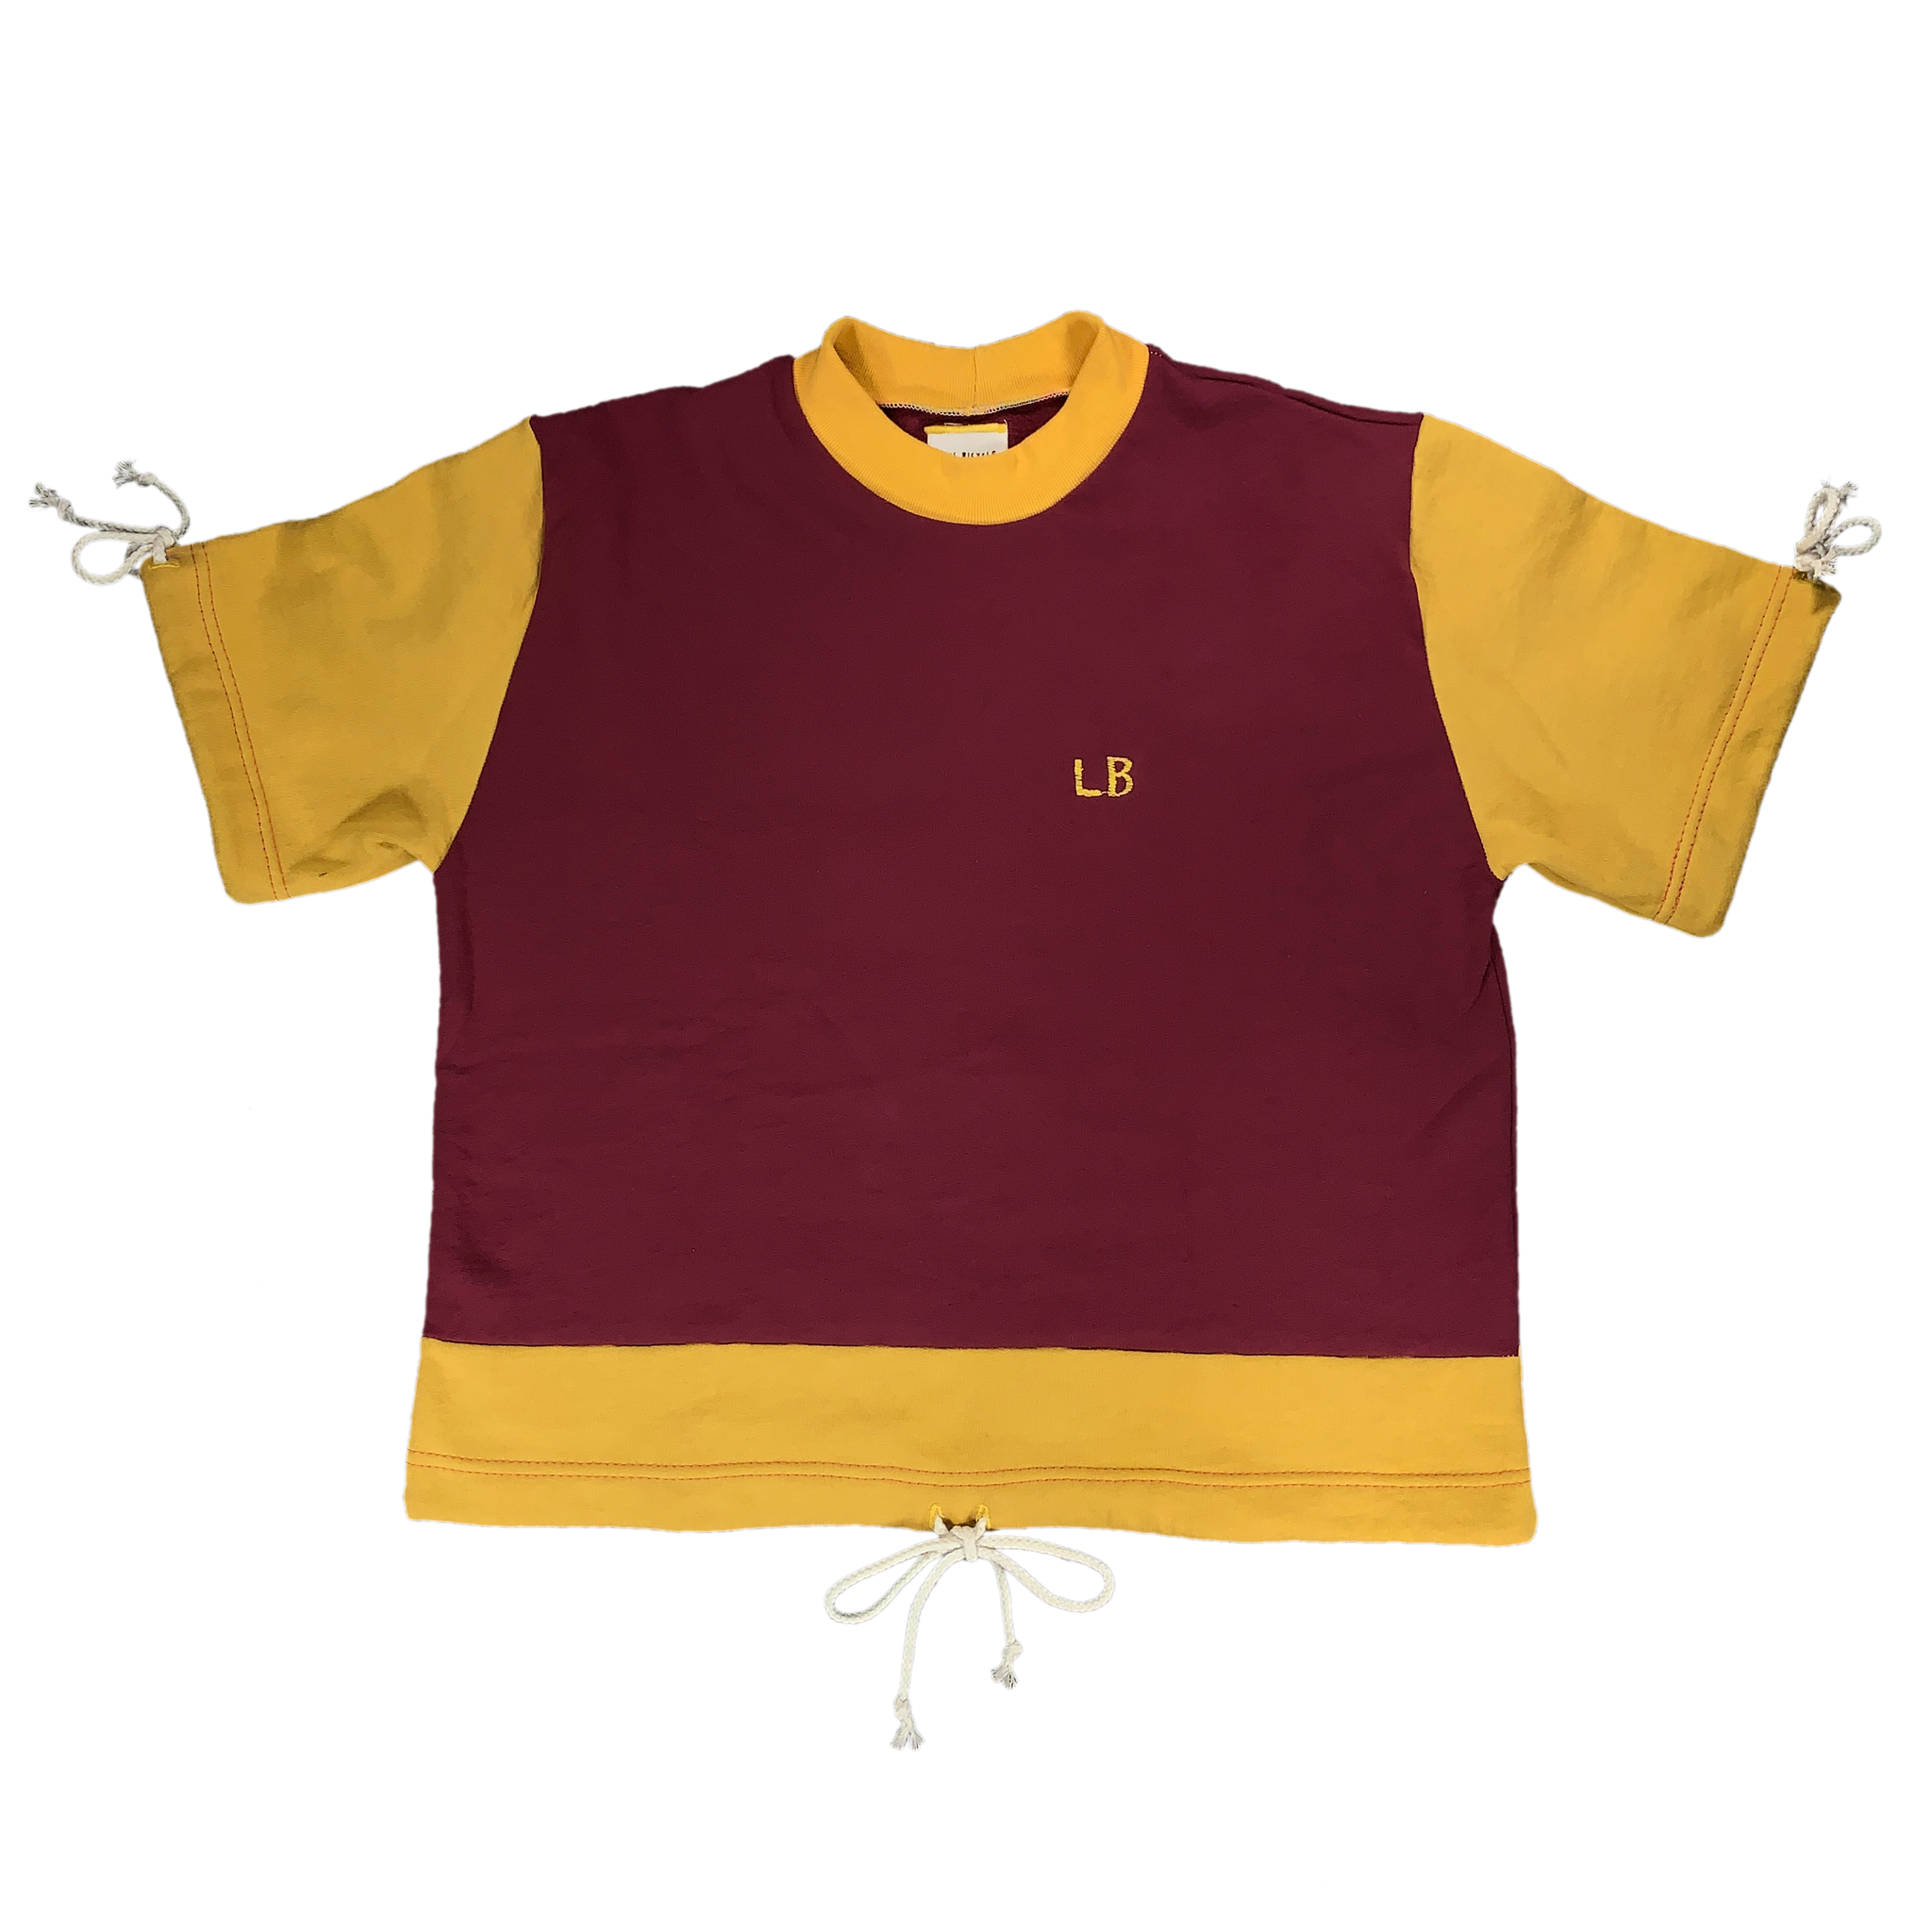 Home sewn cropped sweatshirt tee w/ drawstrings - embroidered and dyed - M